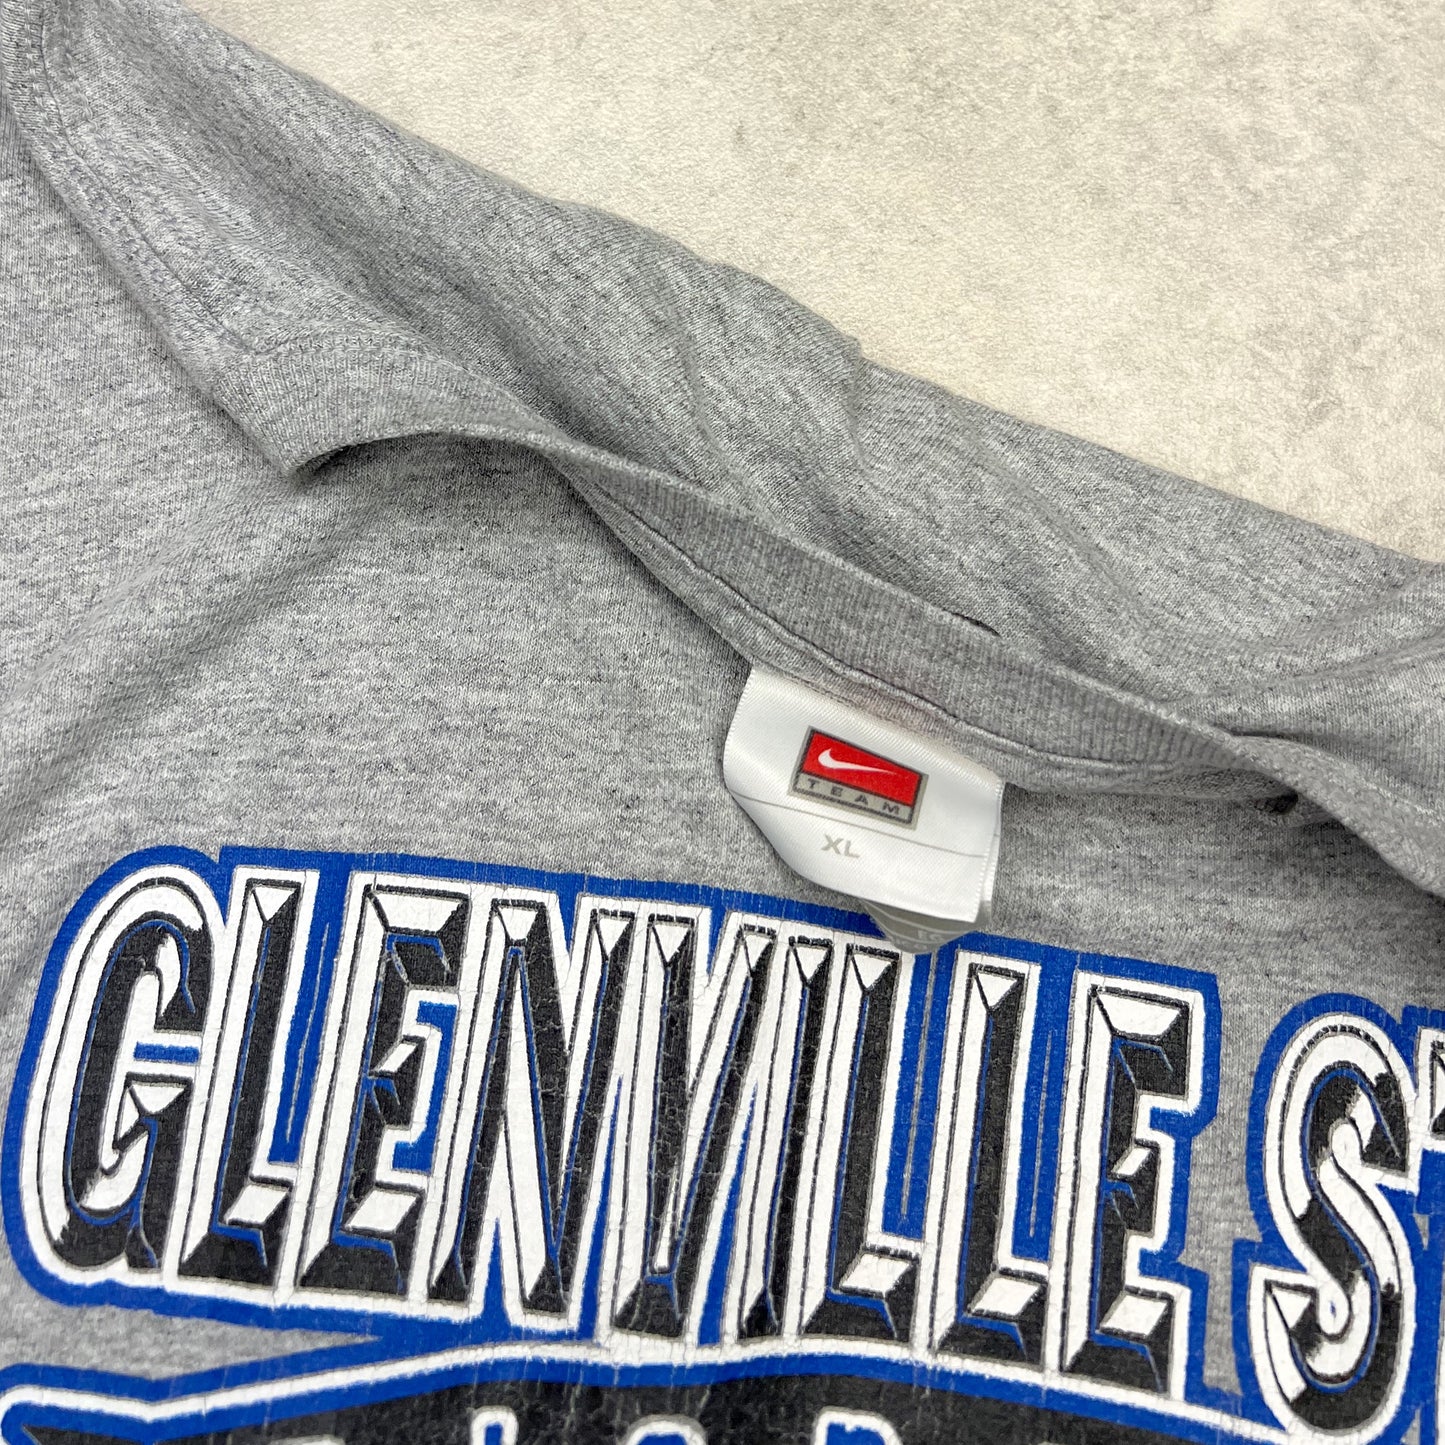 Nike Rare 90s Glenville State Tee (XL)